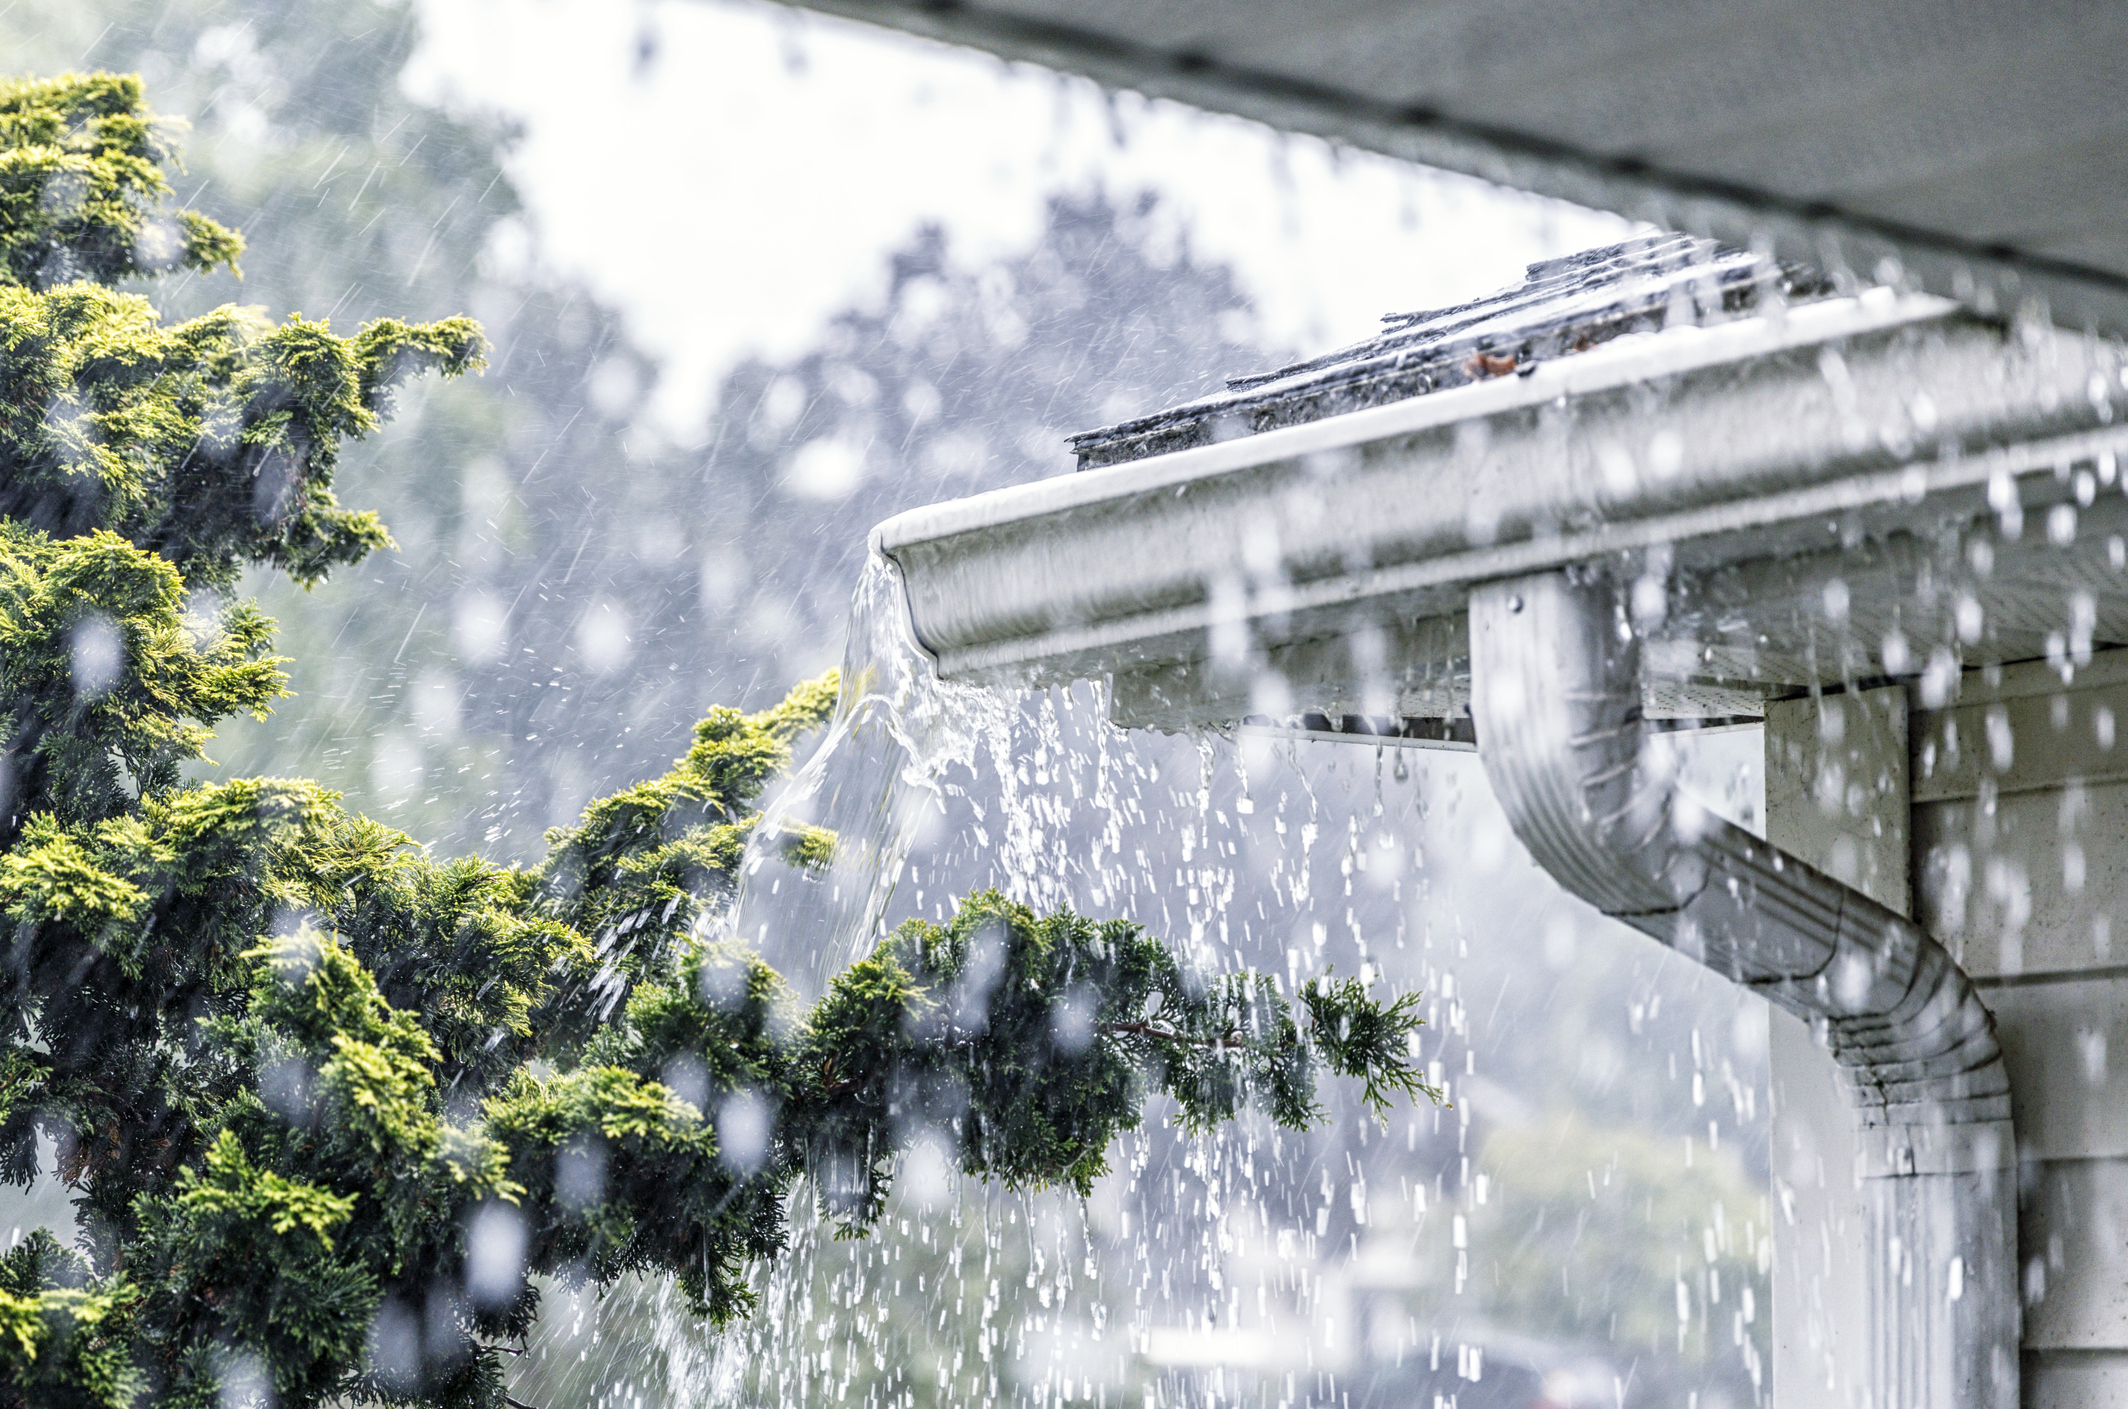 rain pouring over a guttering system